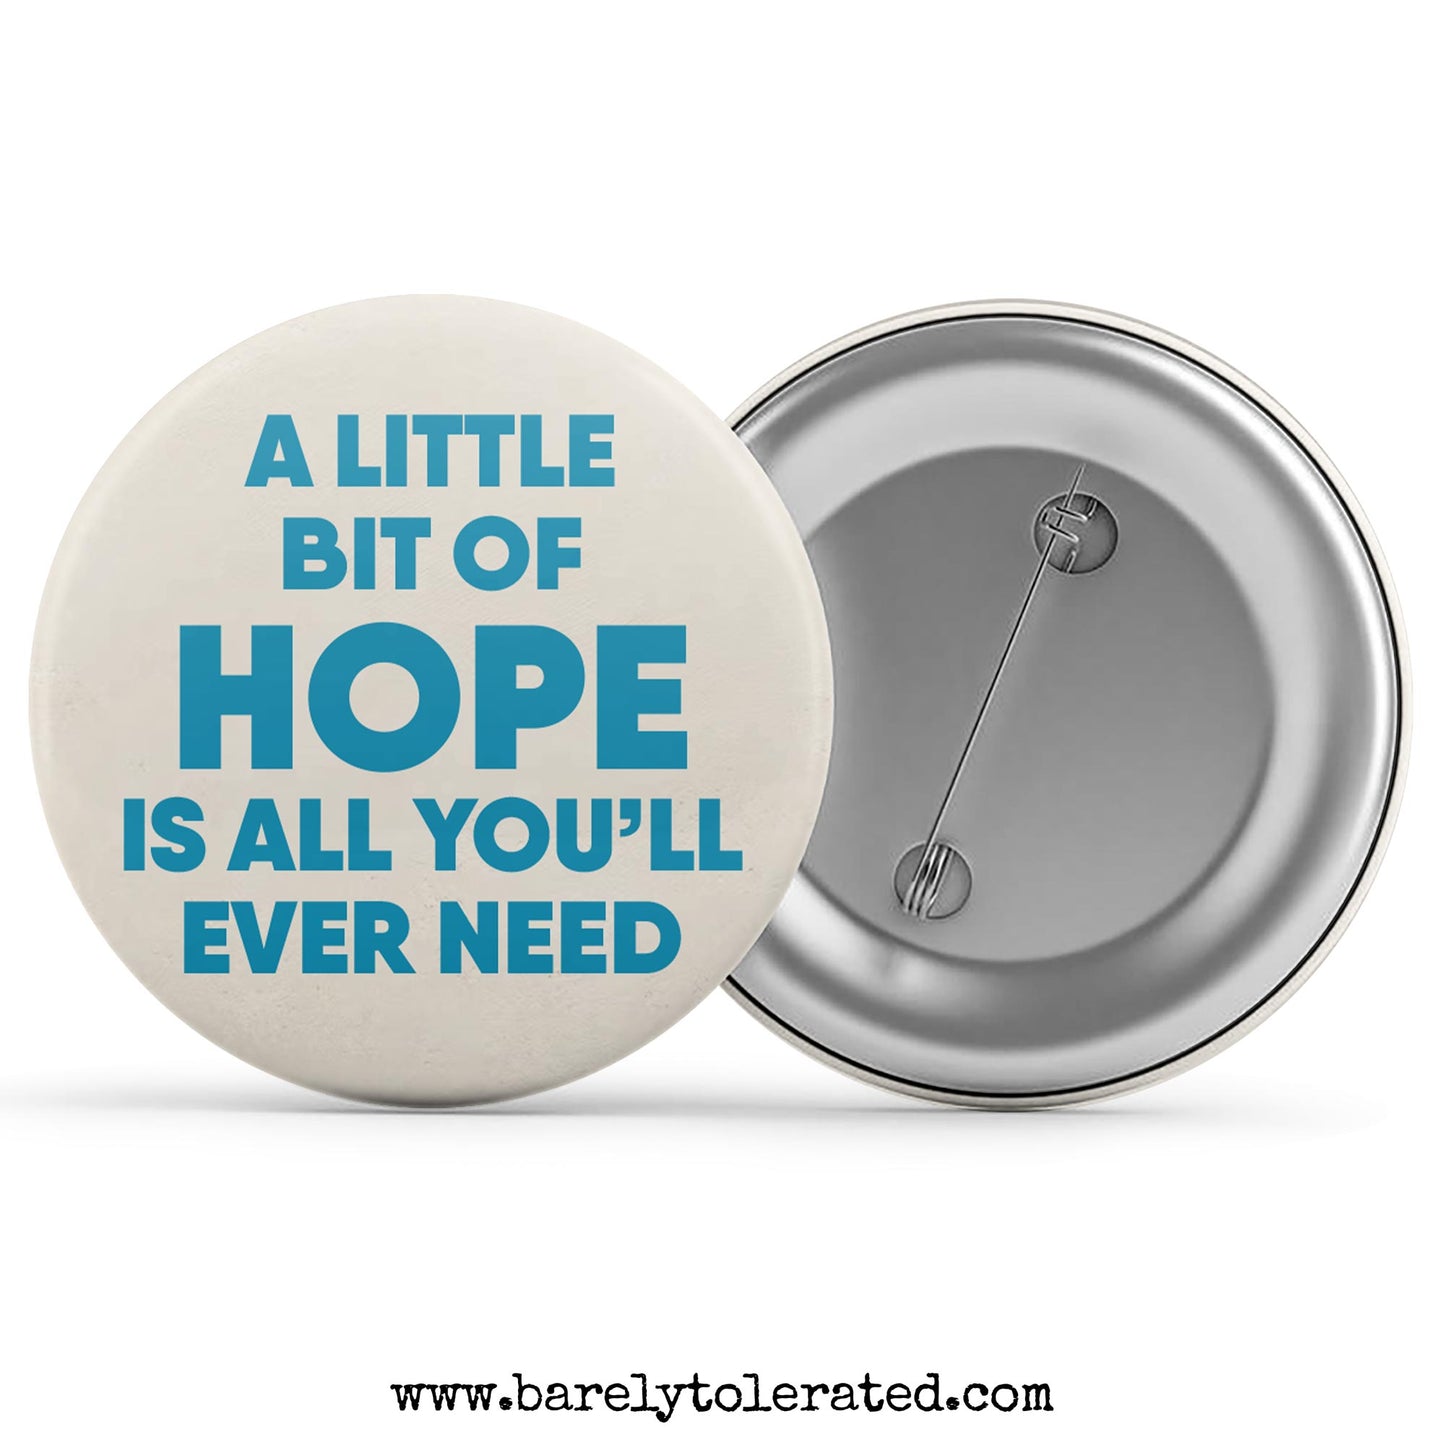 A Little Bit Of Hope Is All You'll Ever Need